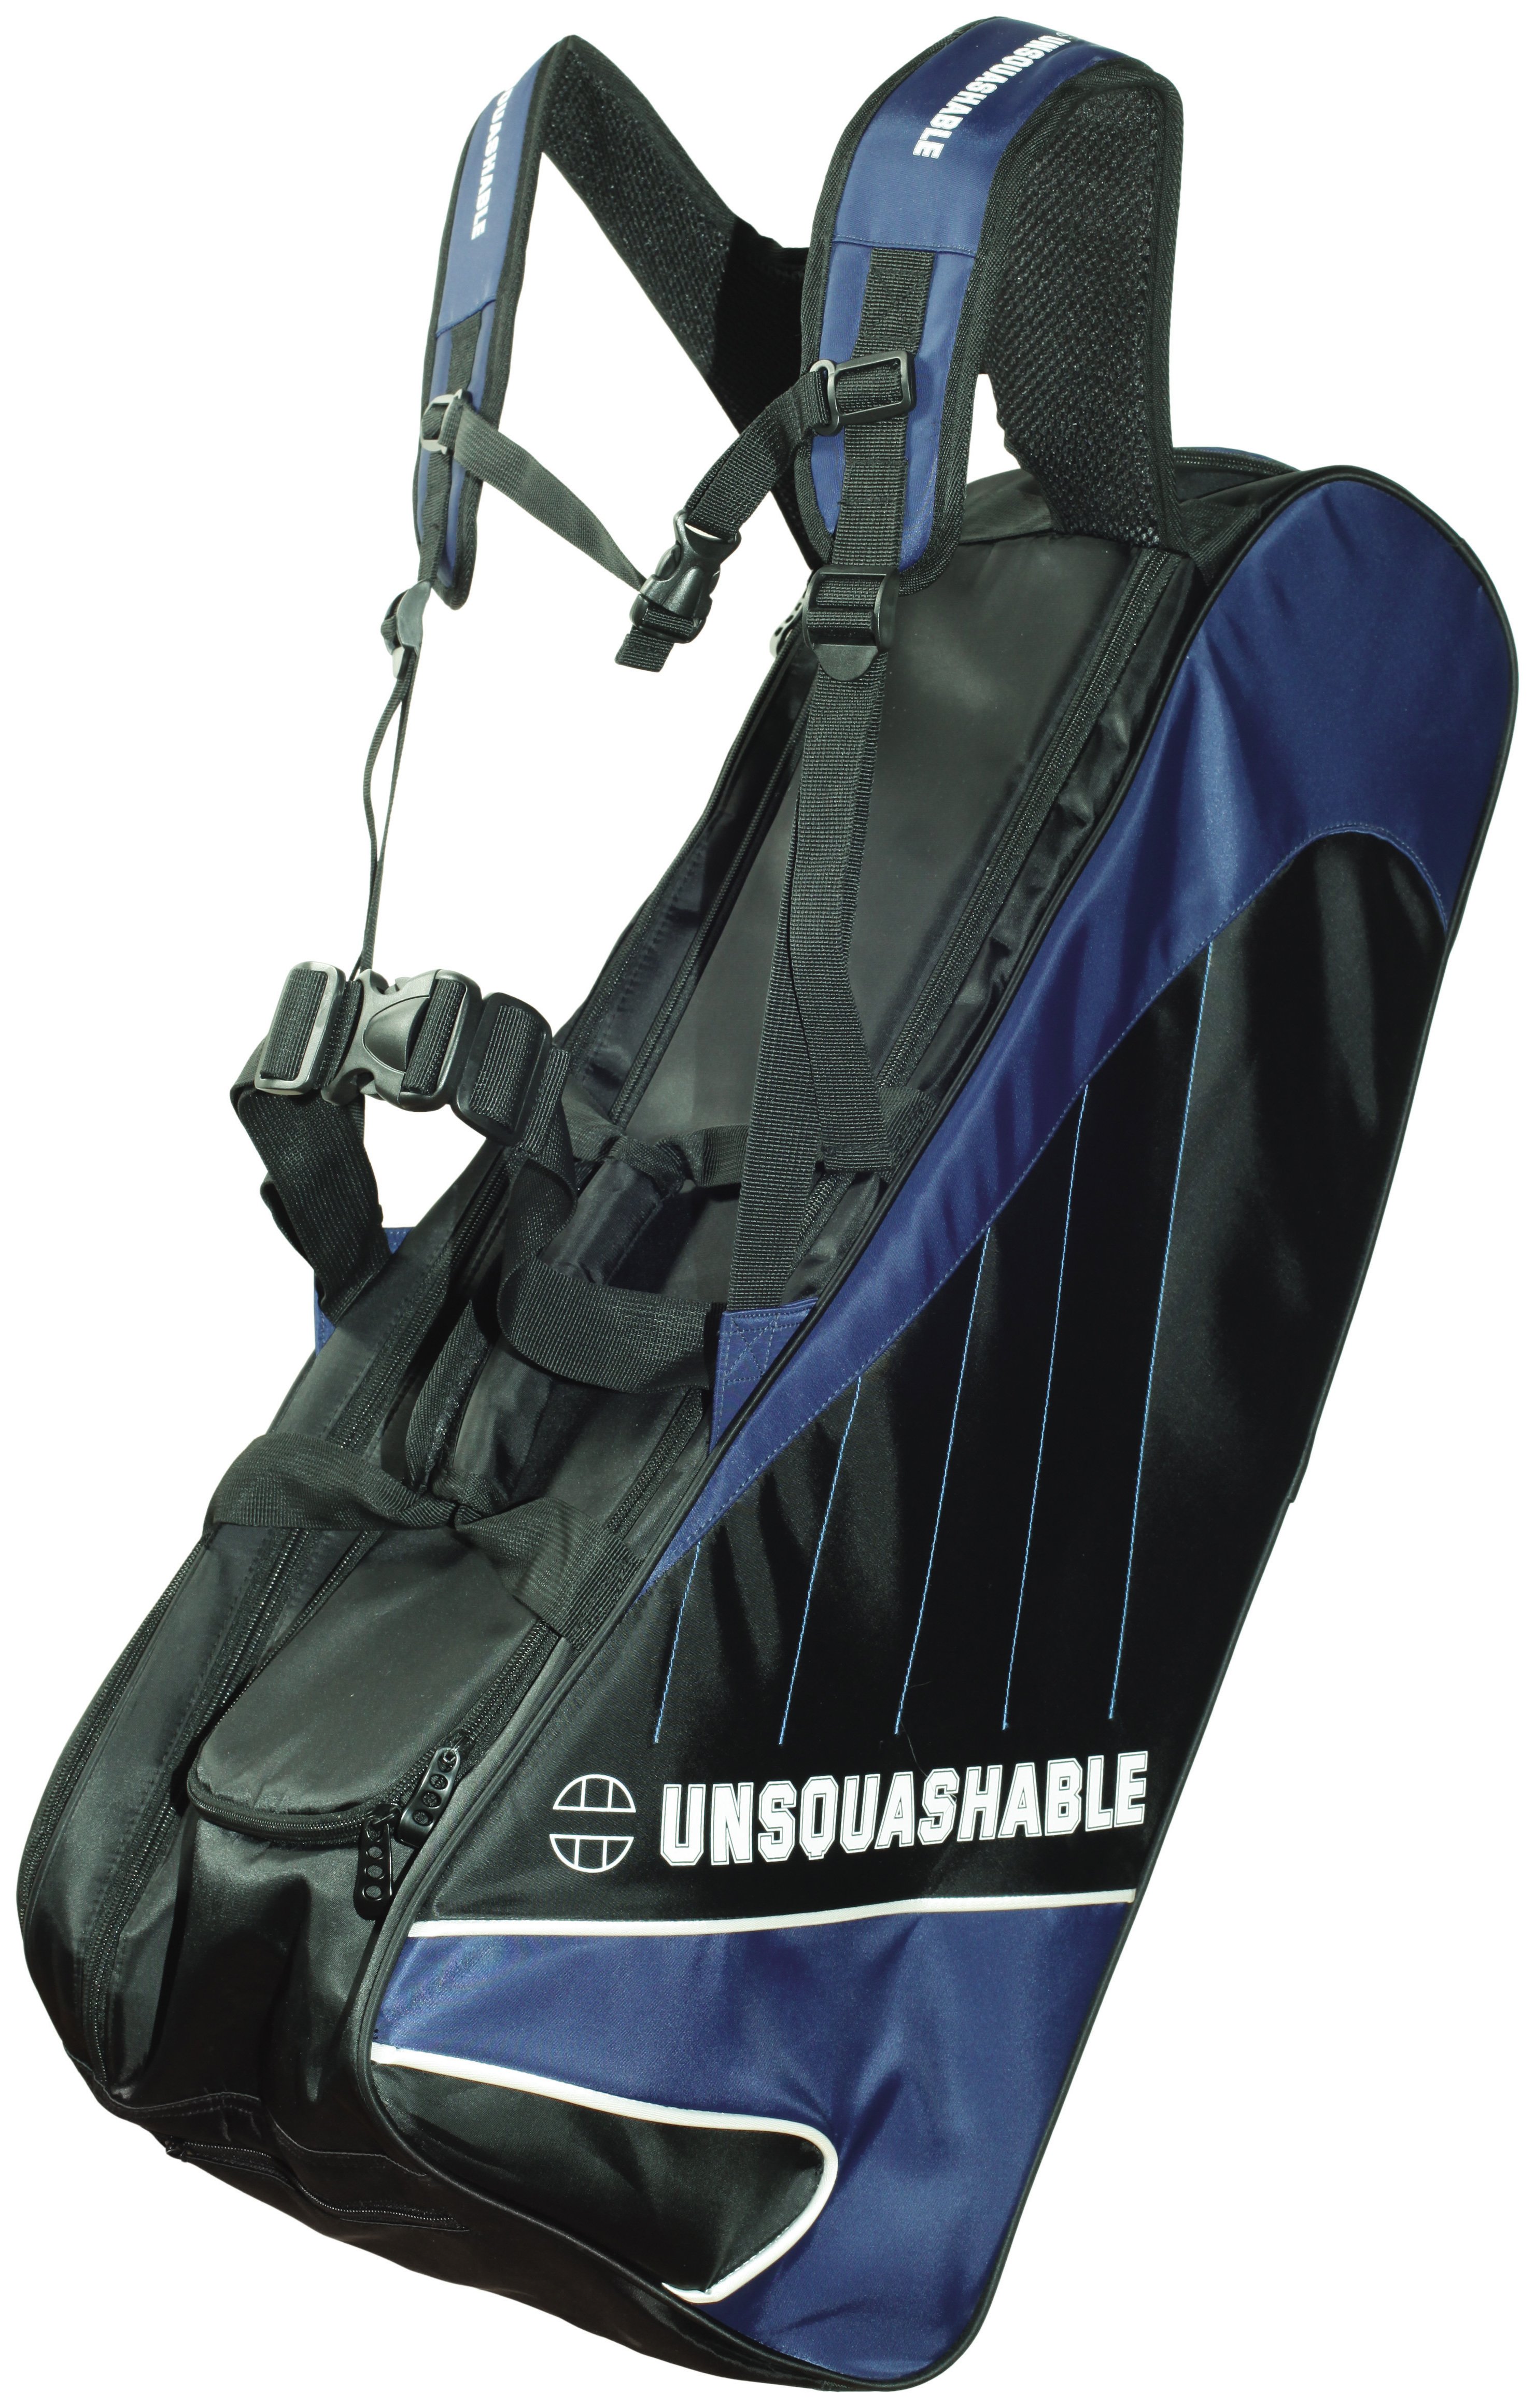 Unsquashable - Double Thermo Racket Bag Review